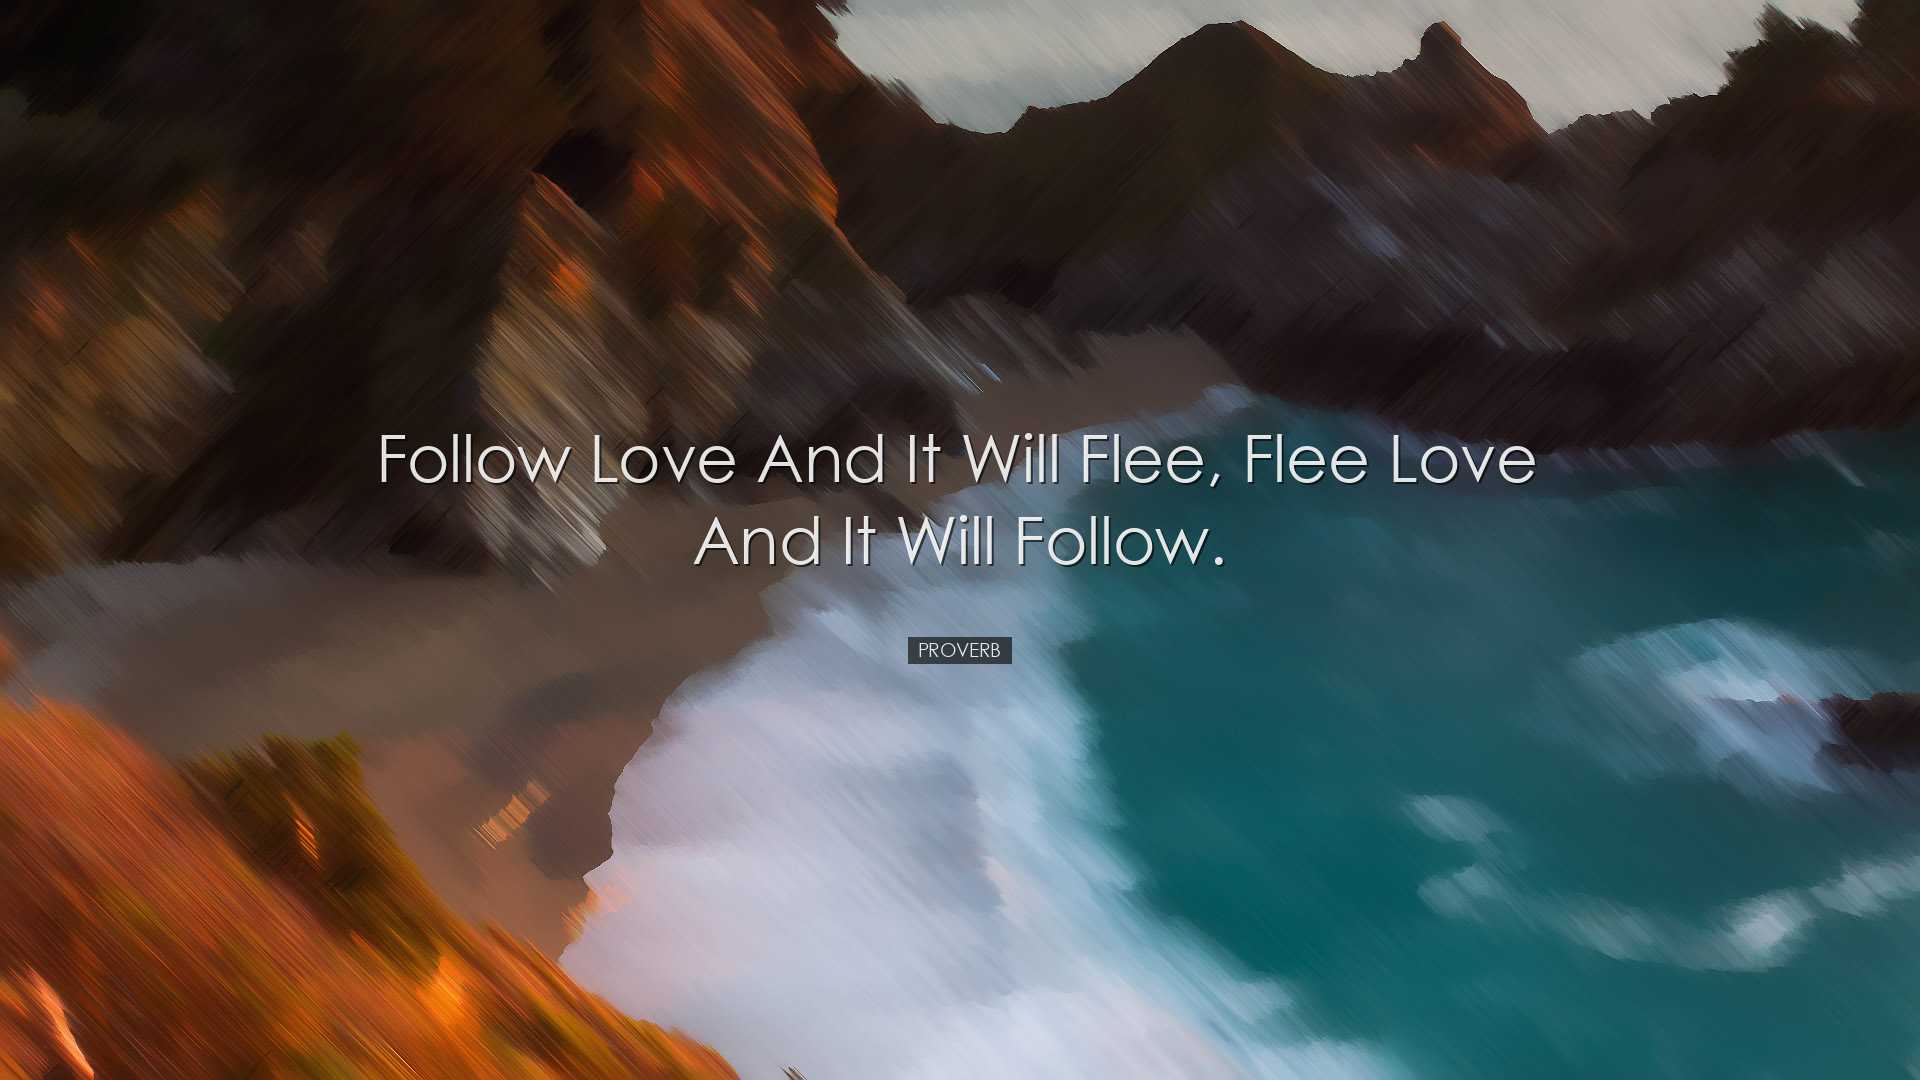 Follow love and it will flee, flee love and it will follow. - Prov